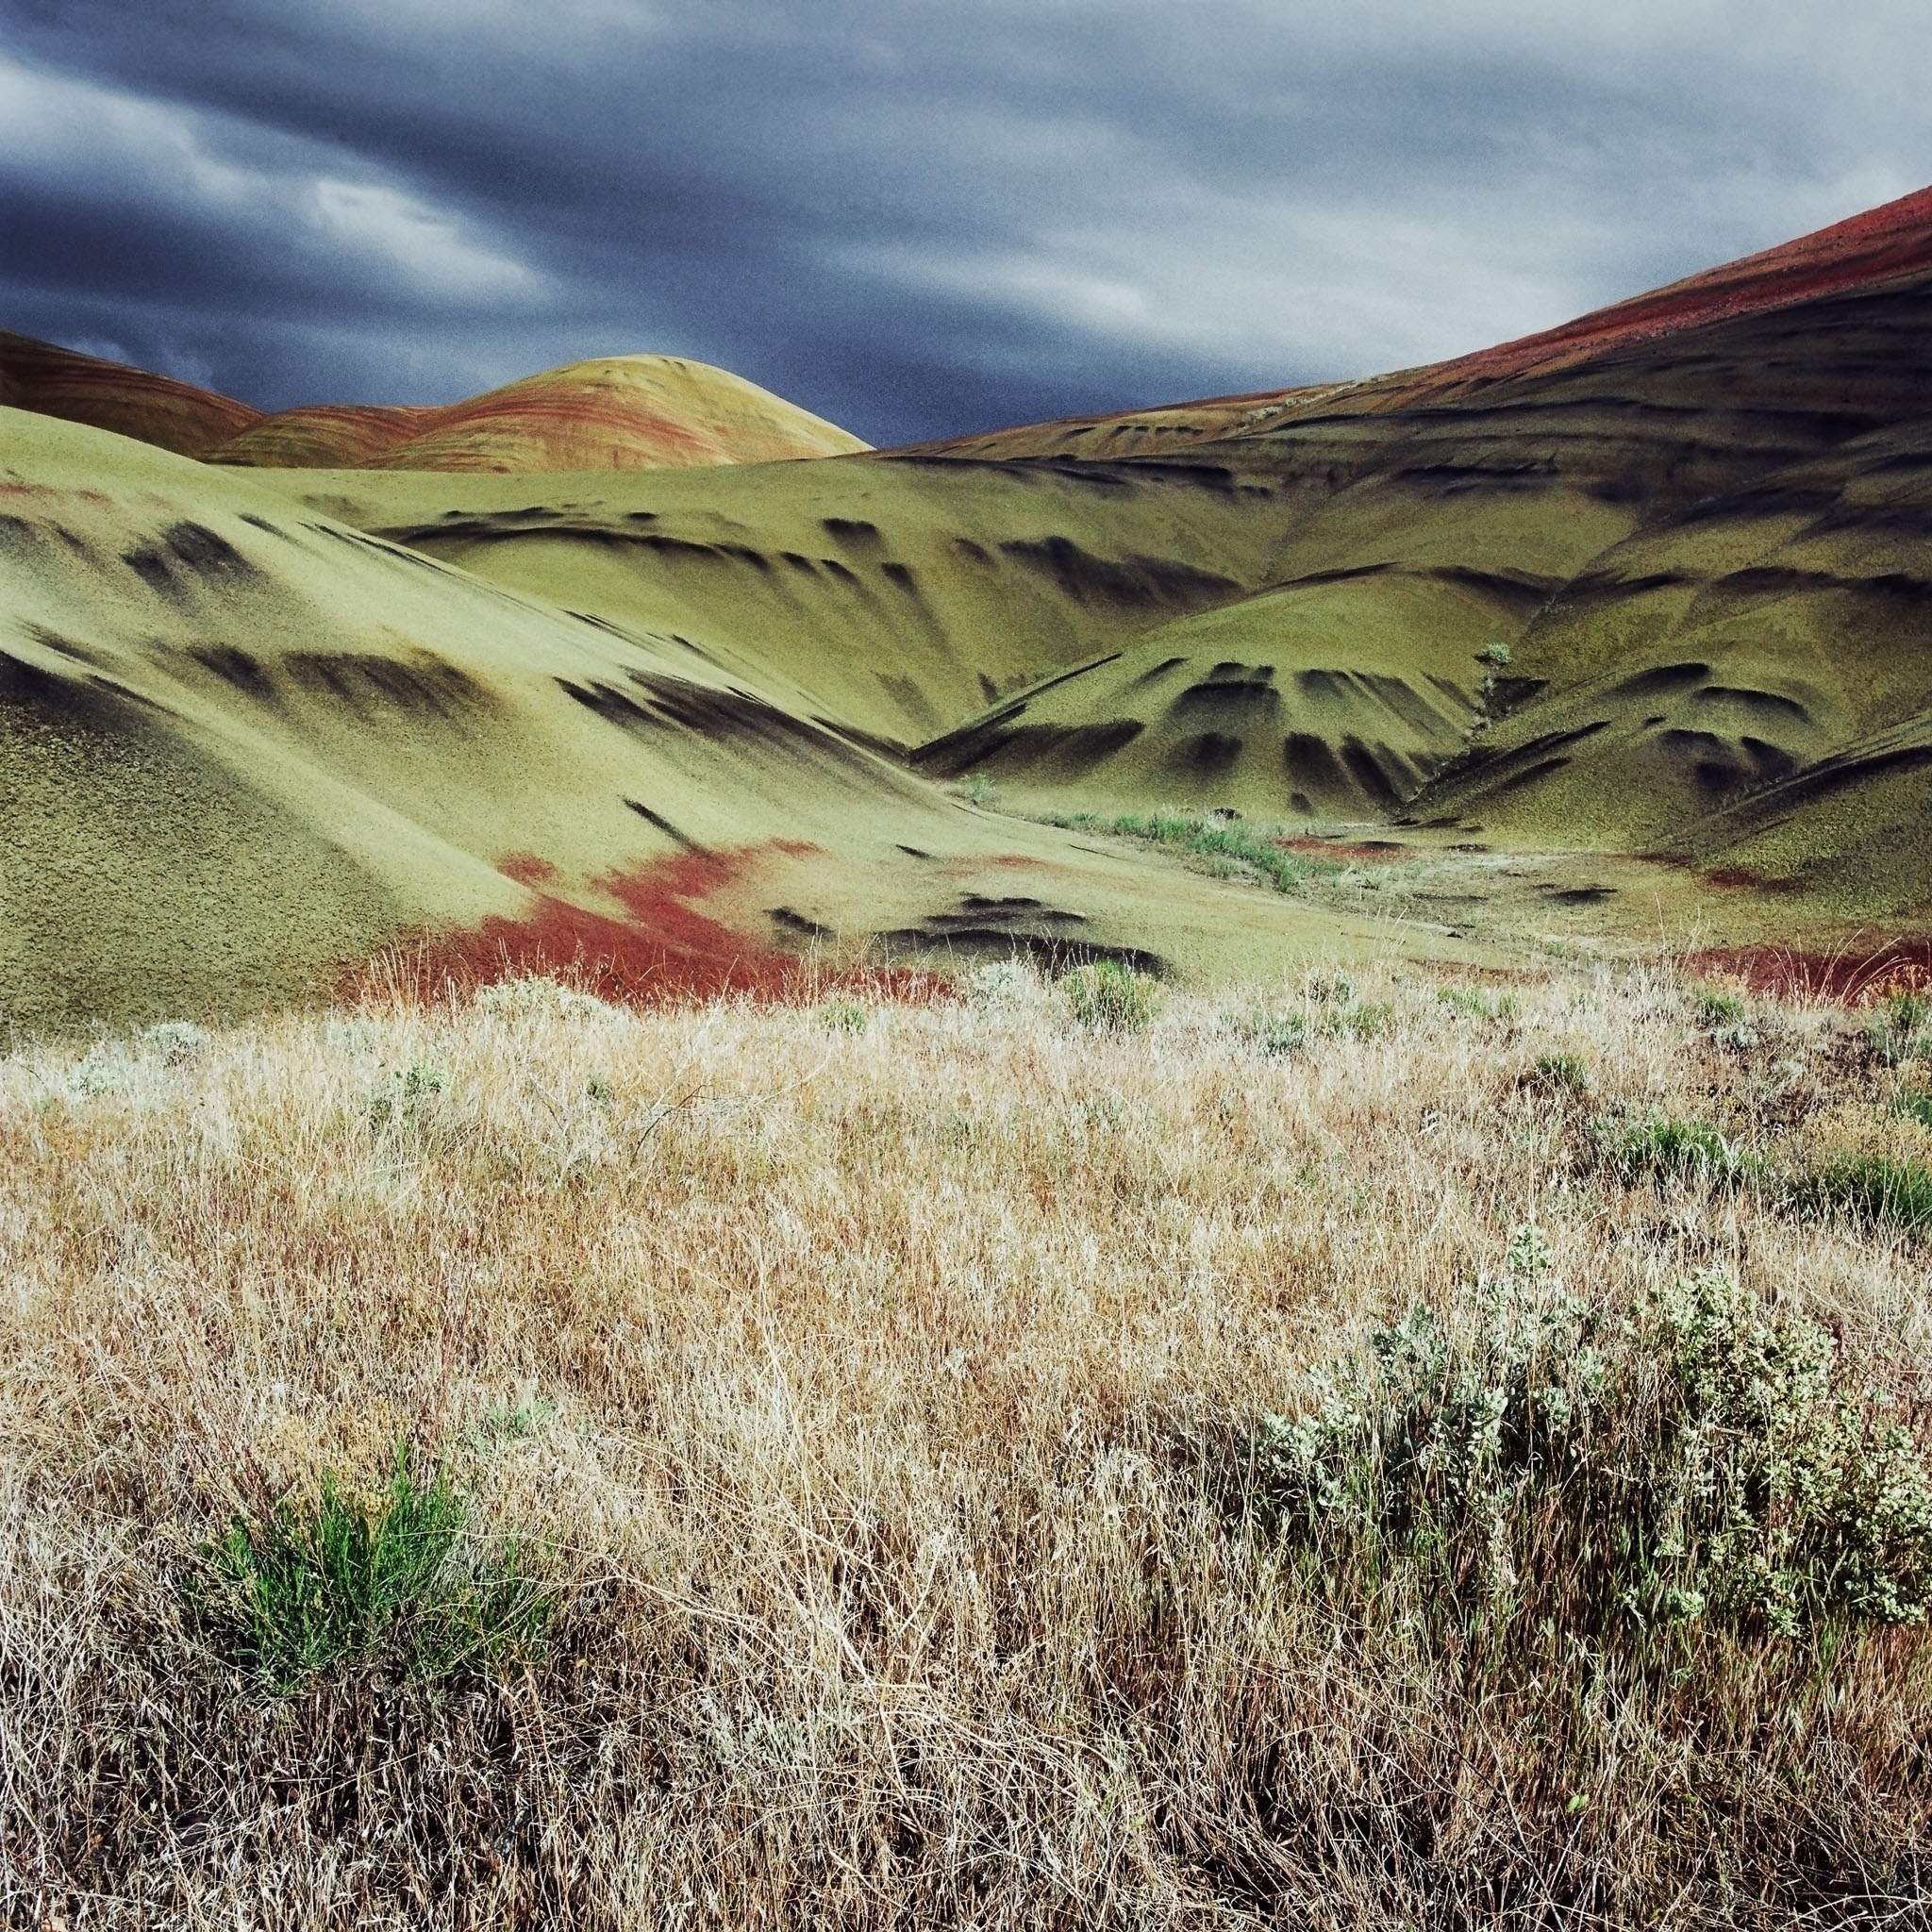 painted-hills-and-grass-john-day-fossil-beds-central-or-8x8.jpg